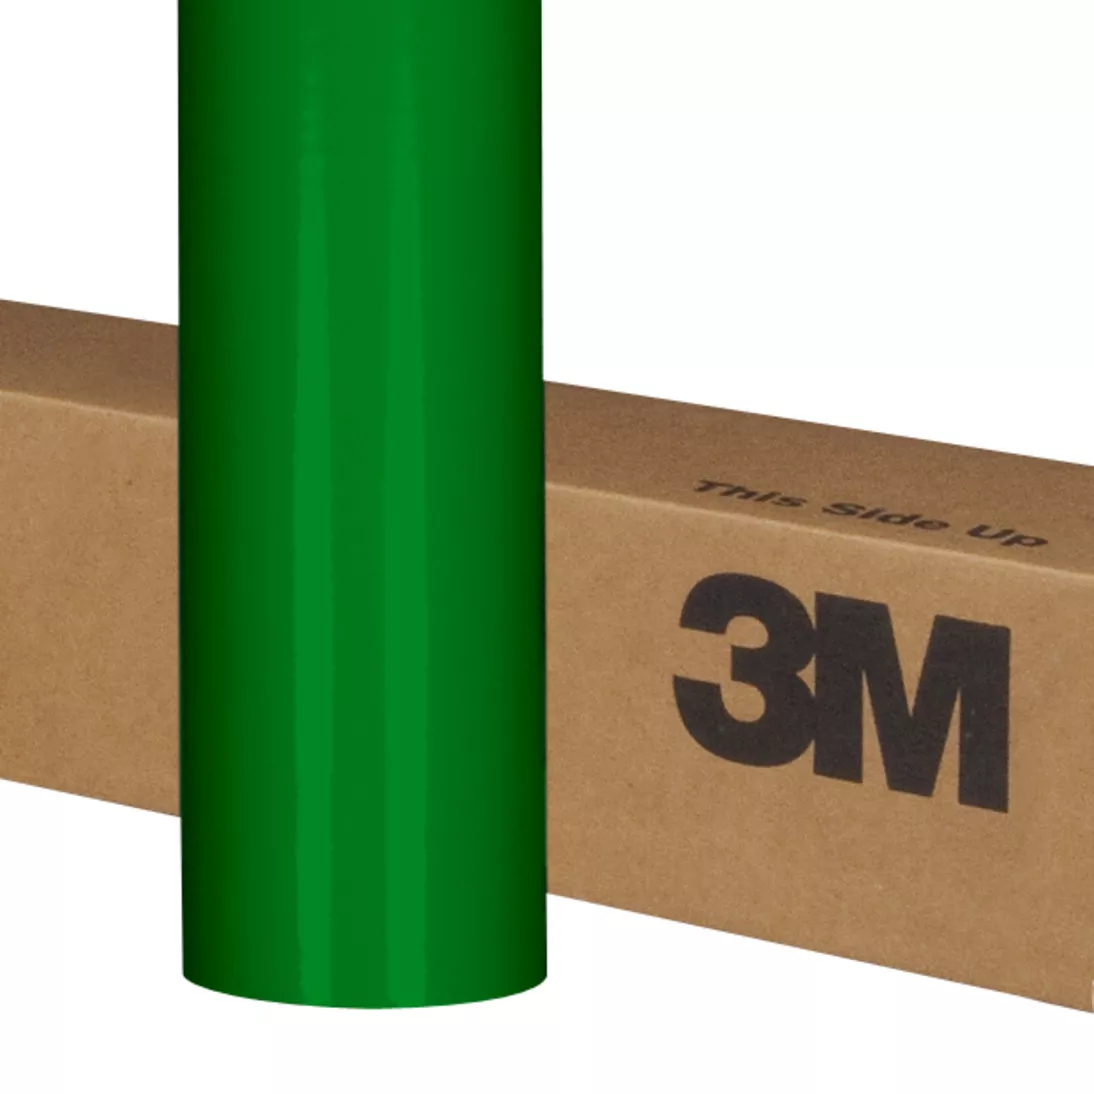 3M™ Scotchcal™ Graphic Film Series 50-745, Bright Green, 48 in x 50 yd